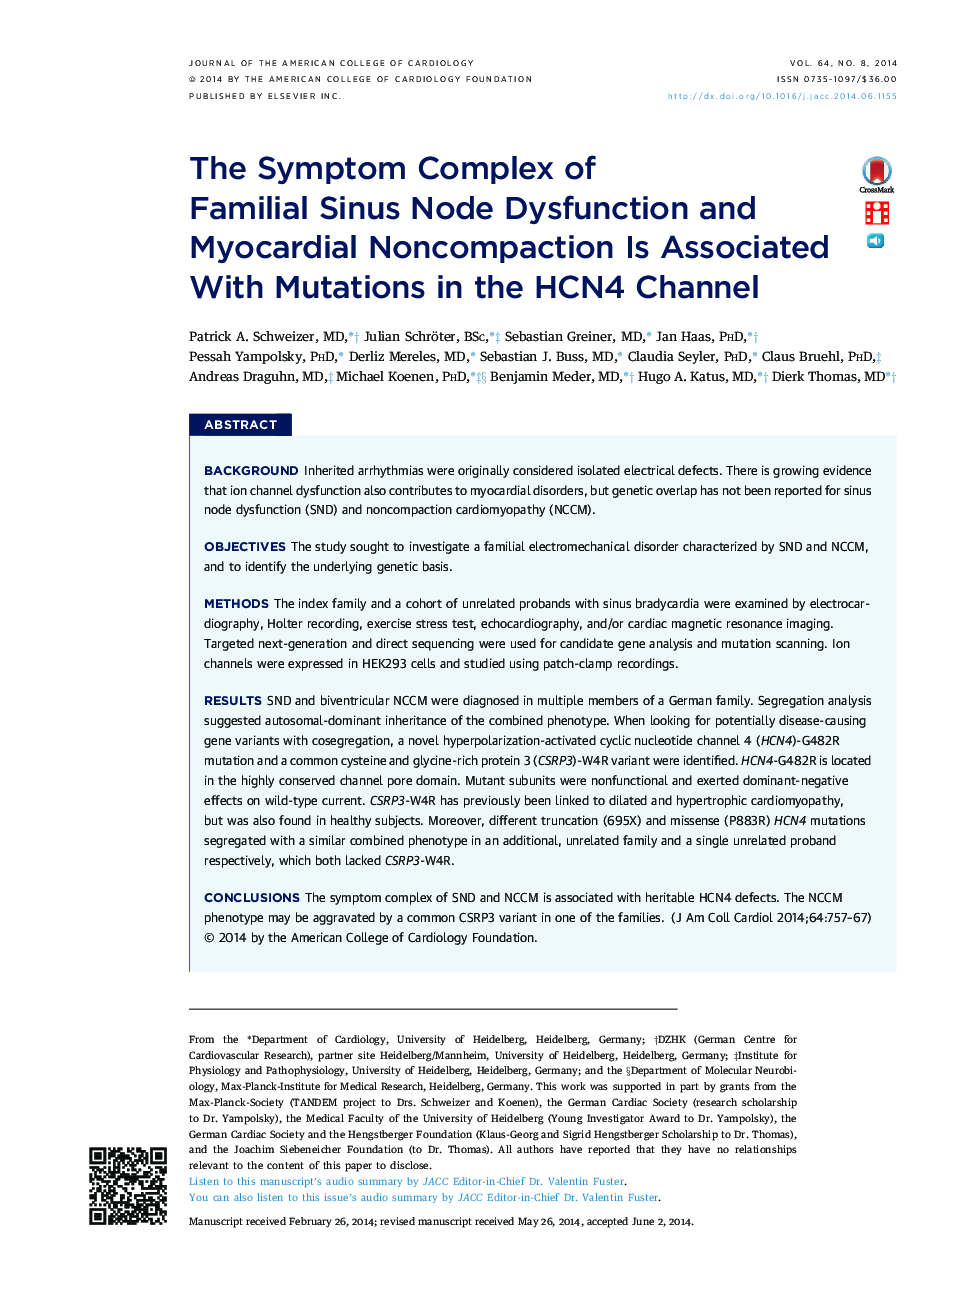 The Symptom Complex of Familial Sinus Node Dysfunction and Myocardial Noncompaction Is Associated With Mutations in the HCN4 Channel 